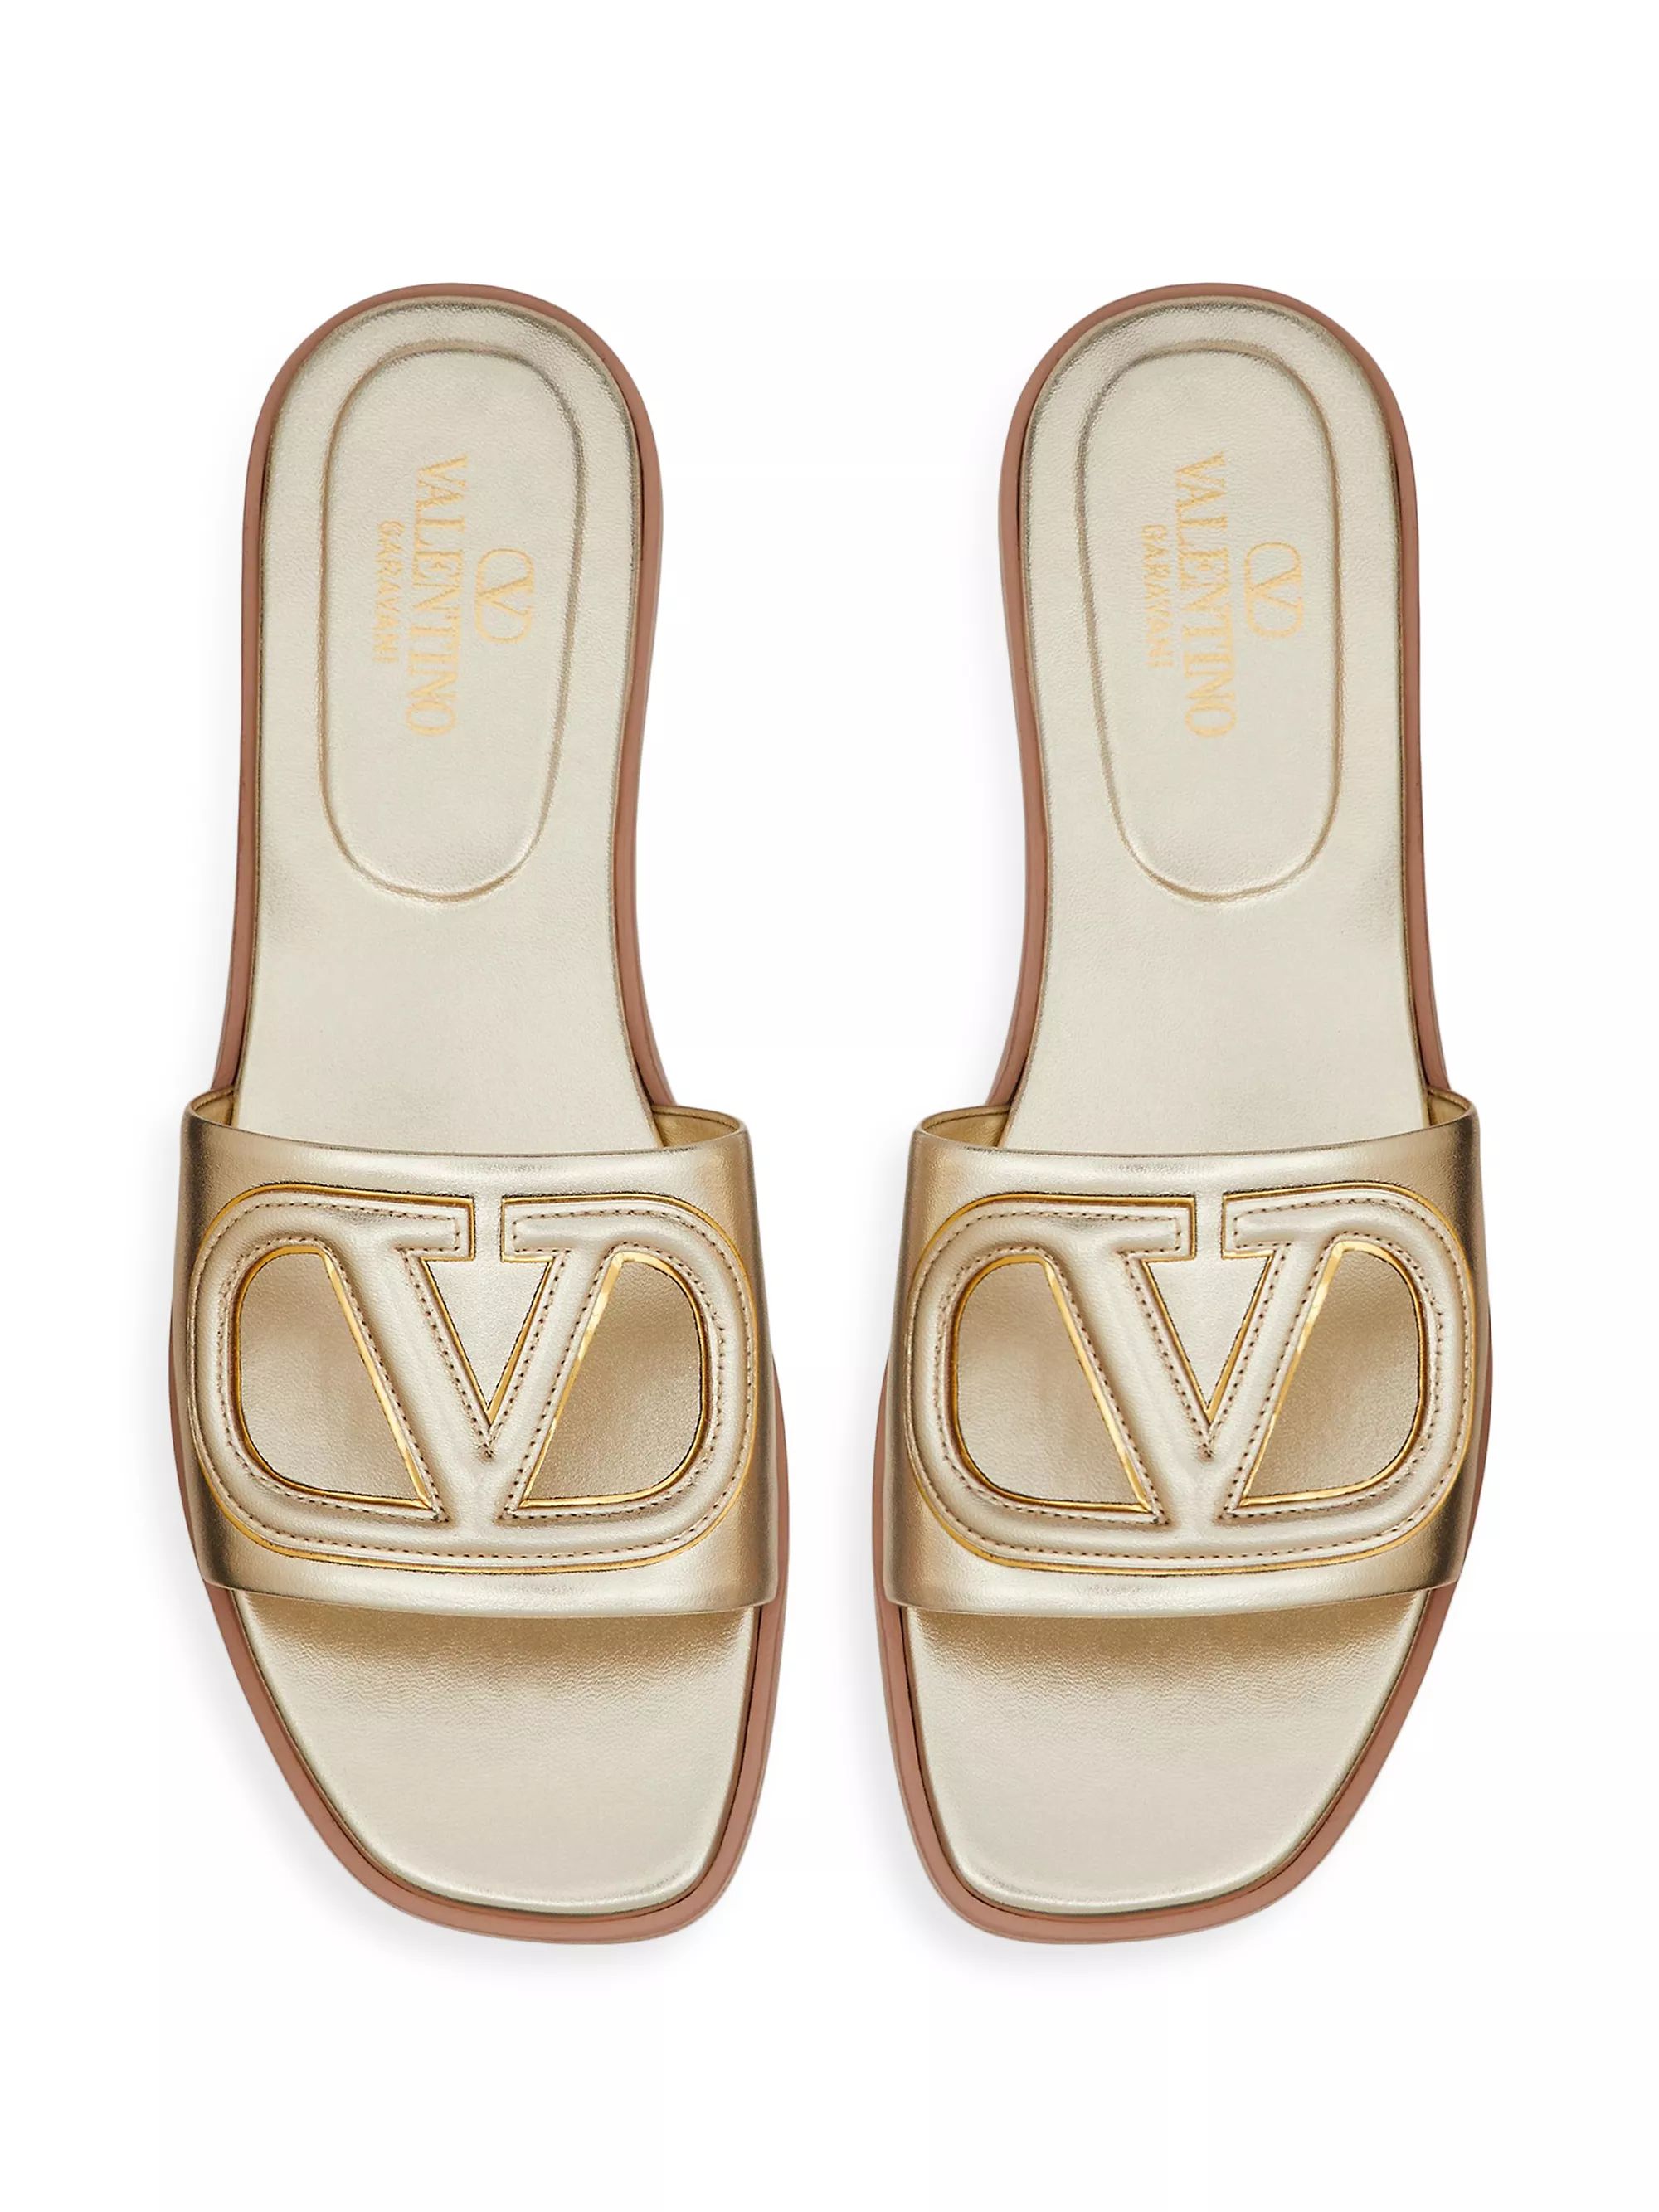 Vlogo Cut-Out Laminated Nappa Leather Slide Sandals | Saks Fifth Avenue